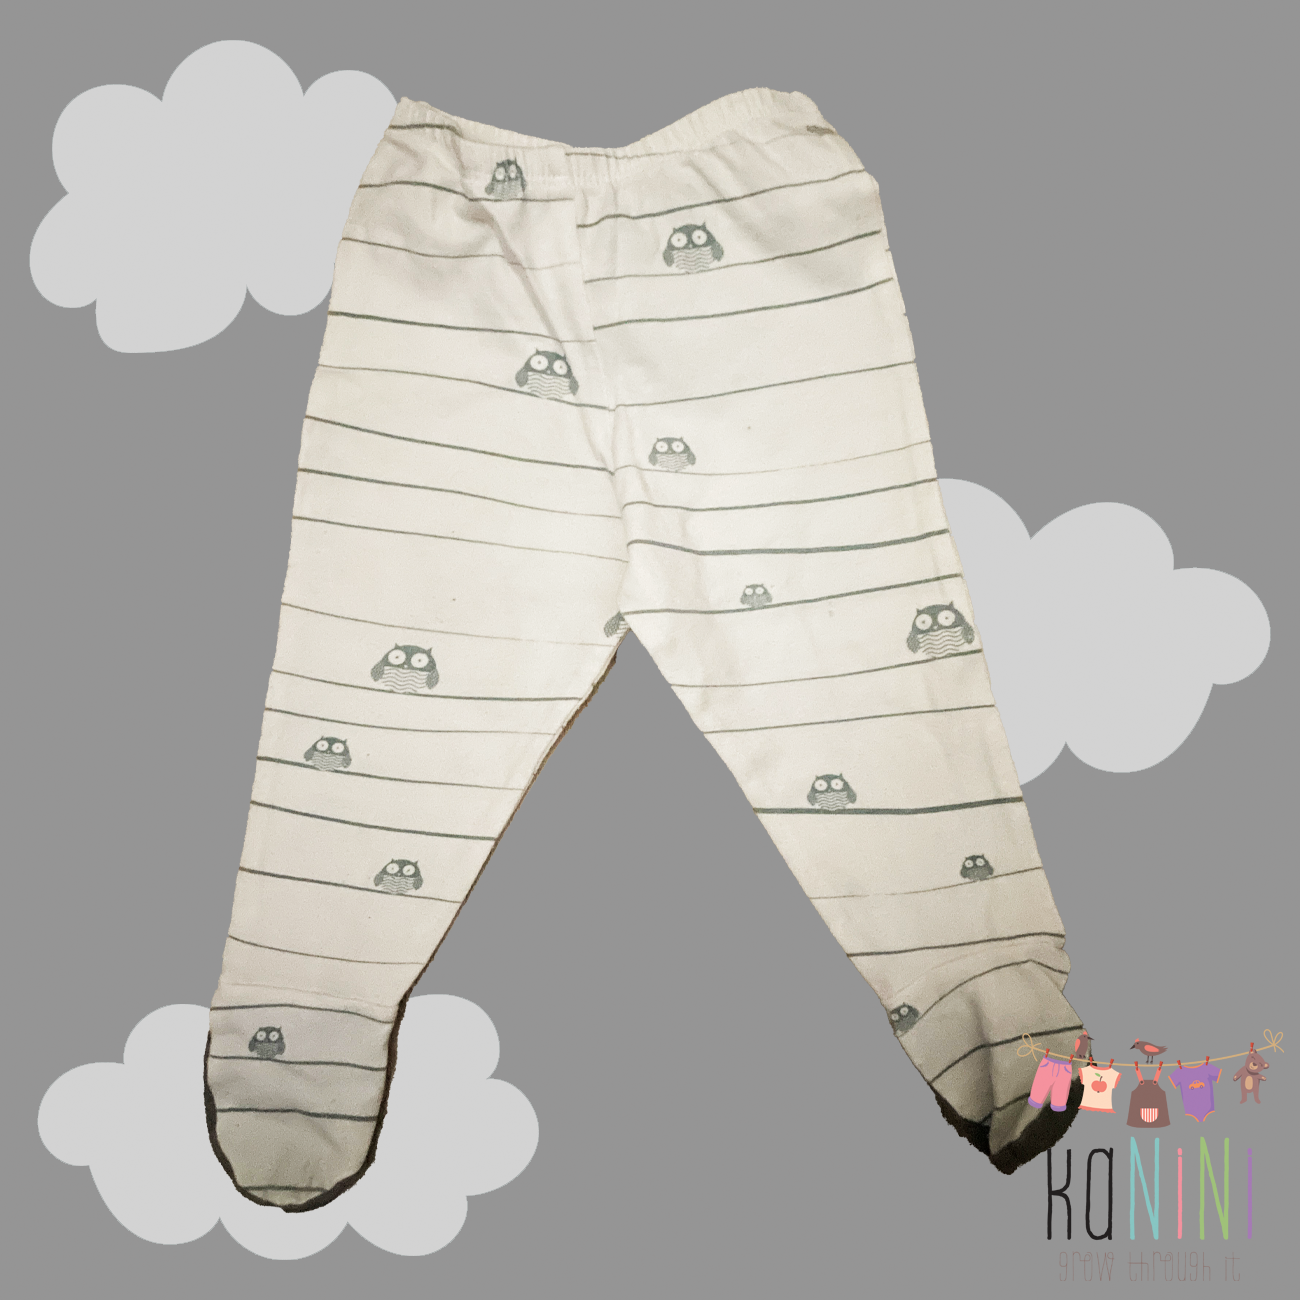 Featured image for “Earthchild 3 - 6 Months Unisex Pants”